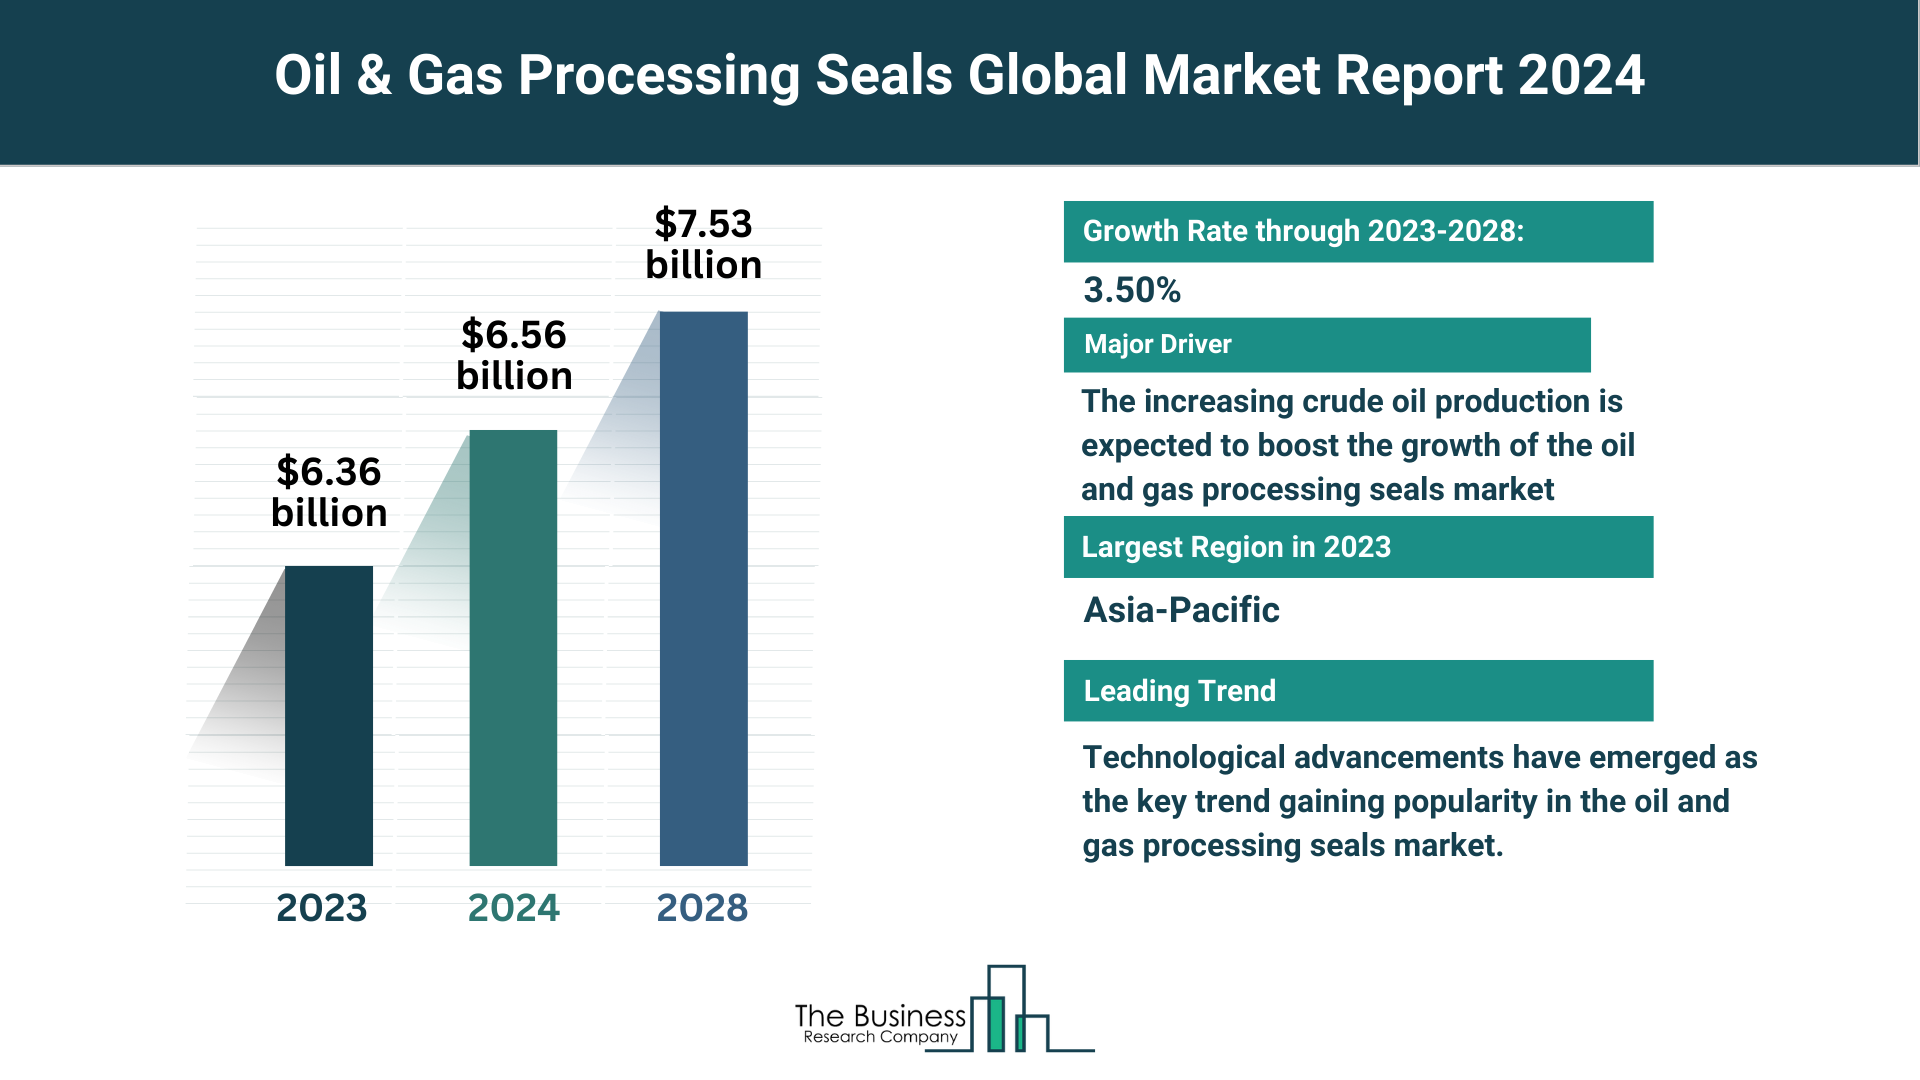 Global Oil & Gas Processing Seals Market,